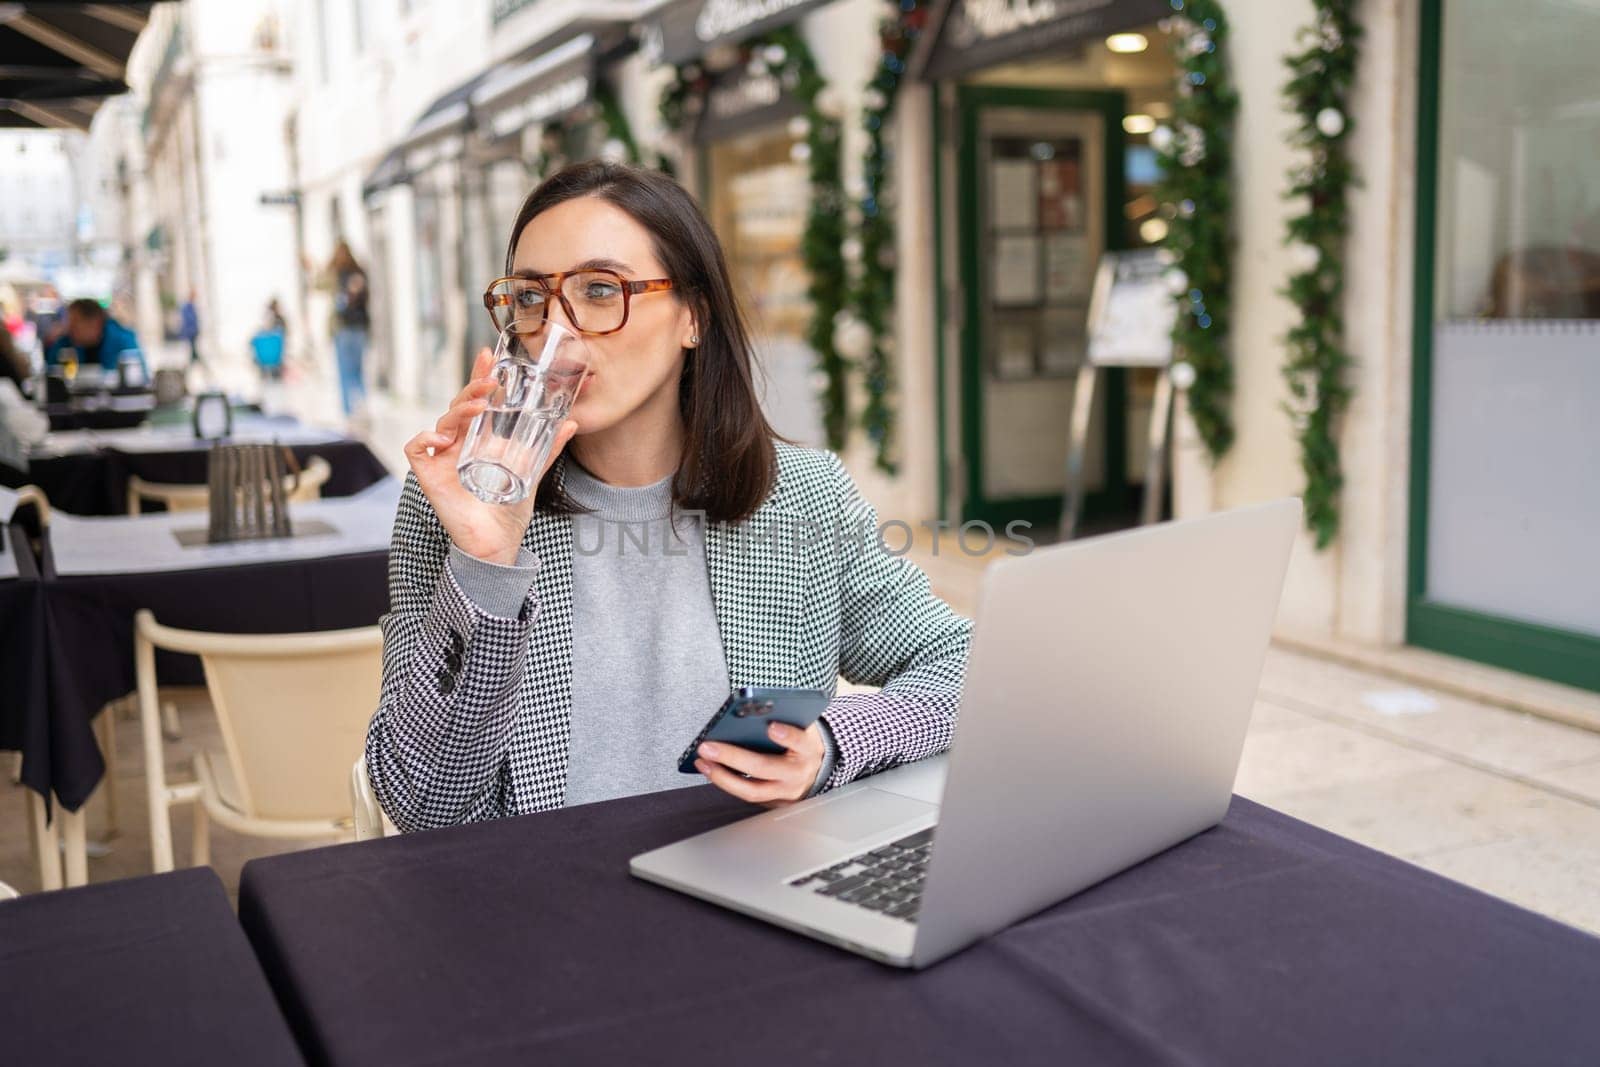 Freelancer using smartphone and laptop sitting outdoor cafe drink water wearing glasses, working in cafe on laptop, holding mobile phone in hands, drinking water from glass.